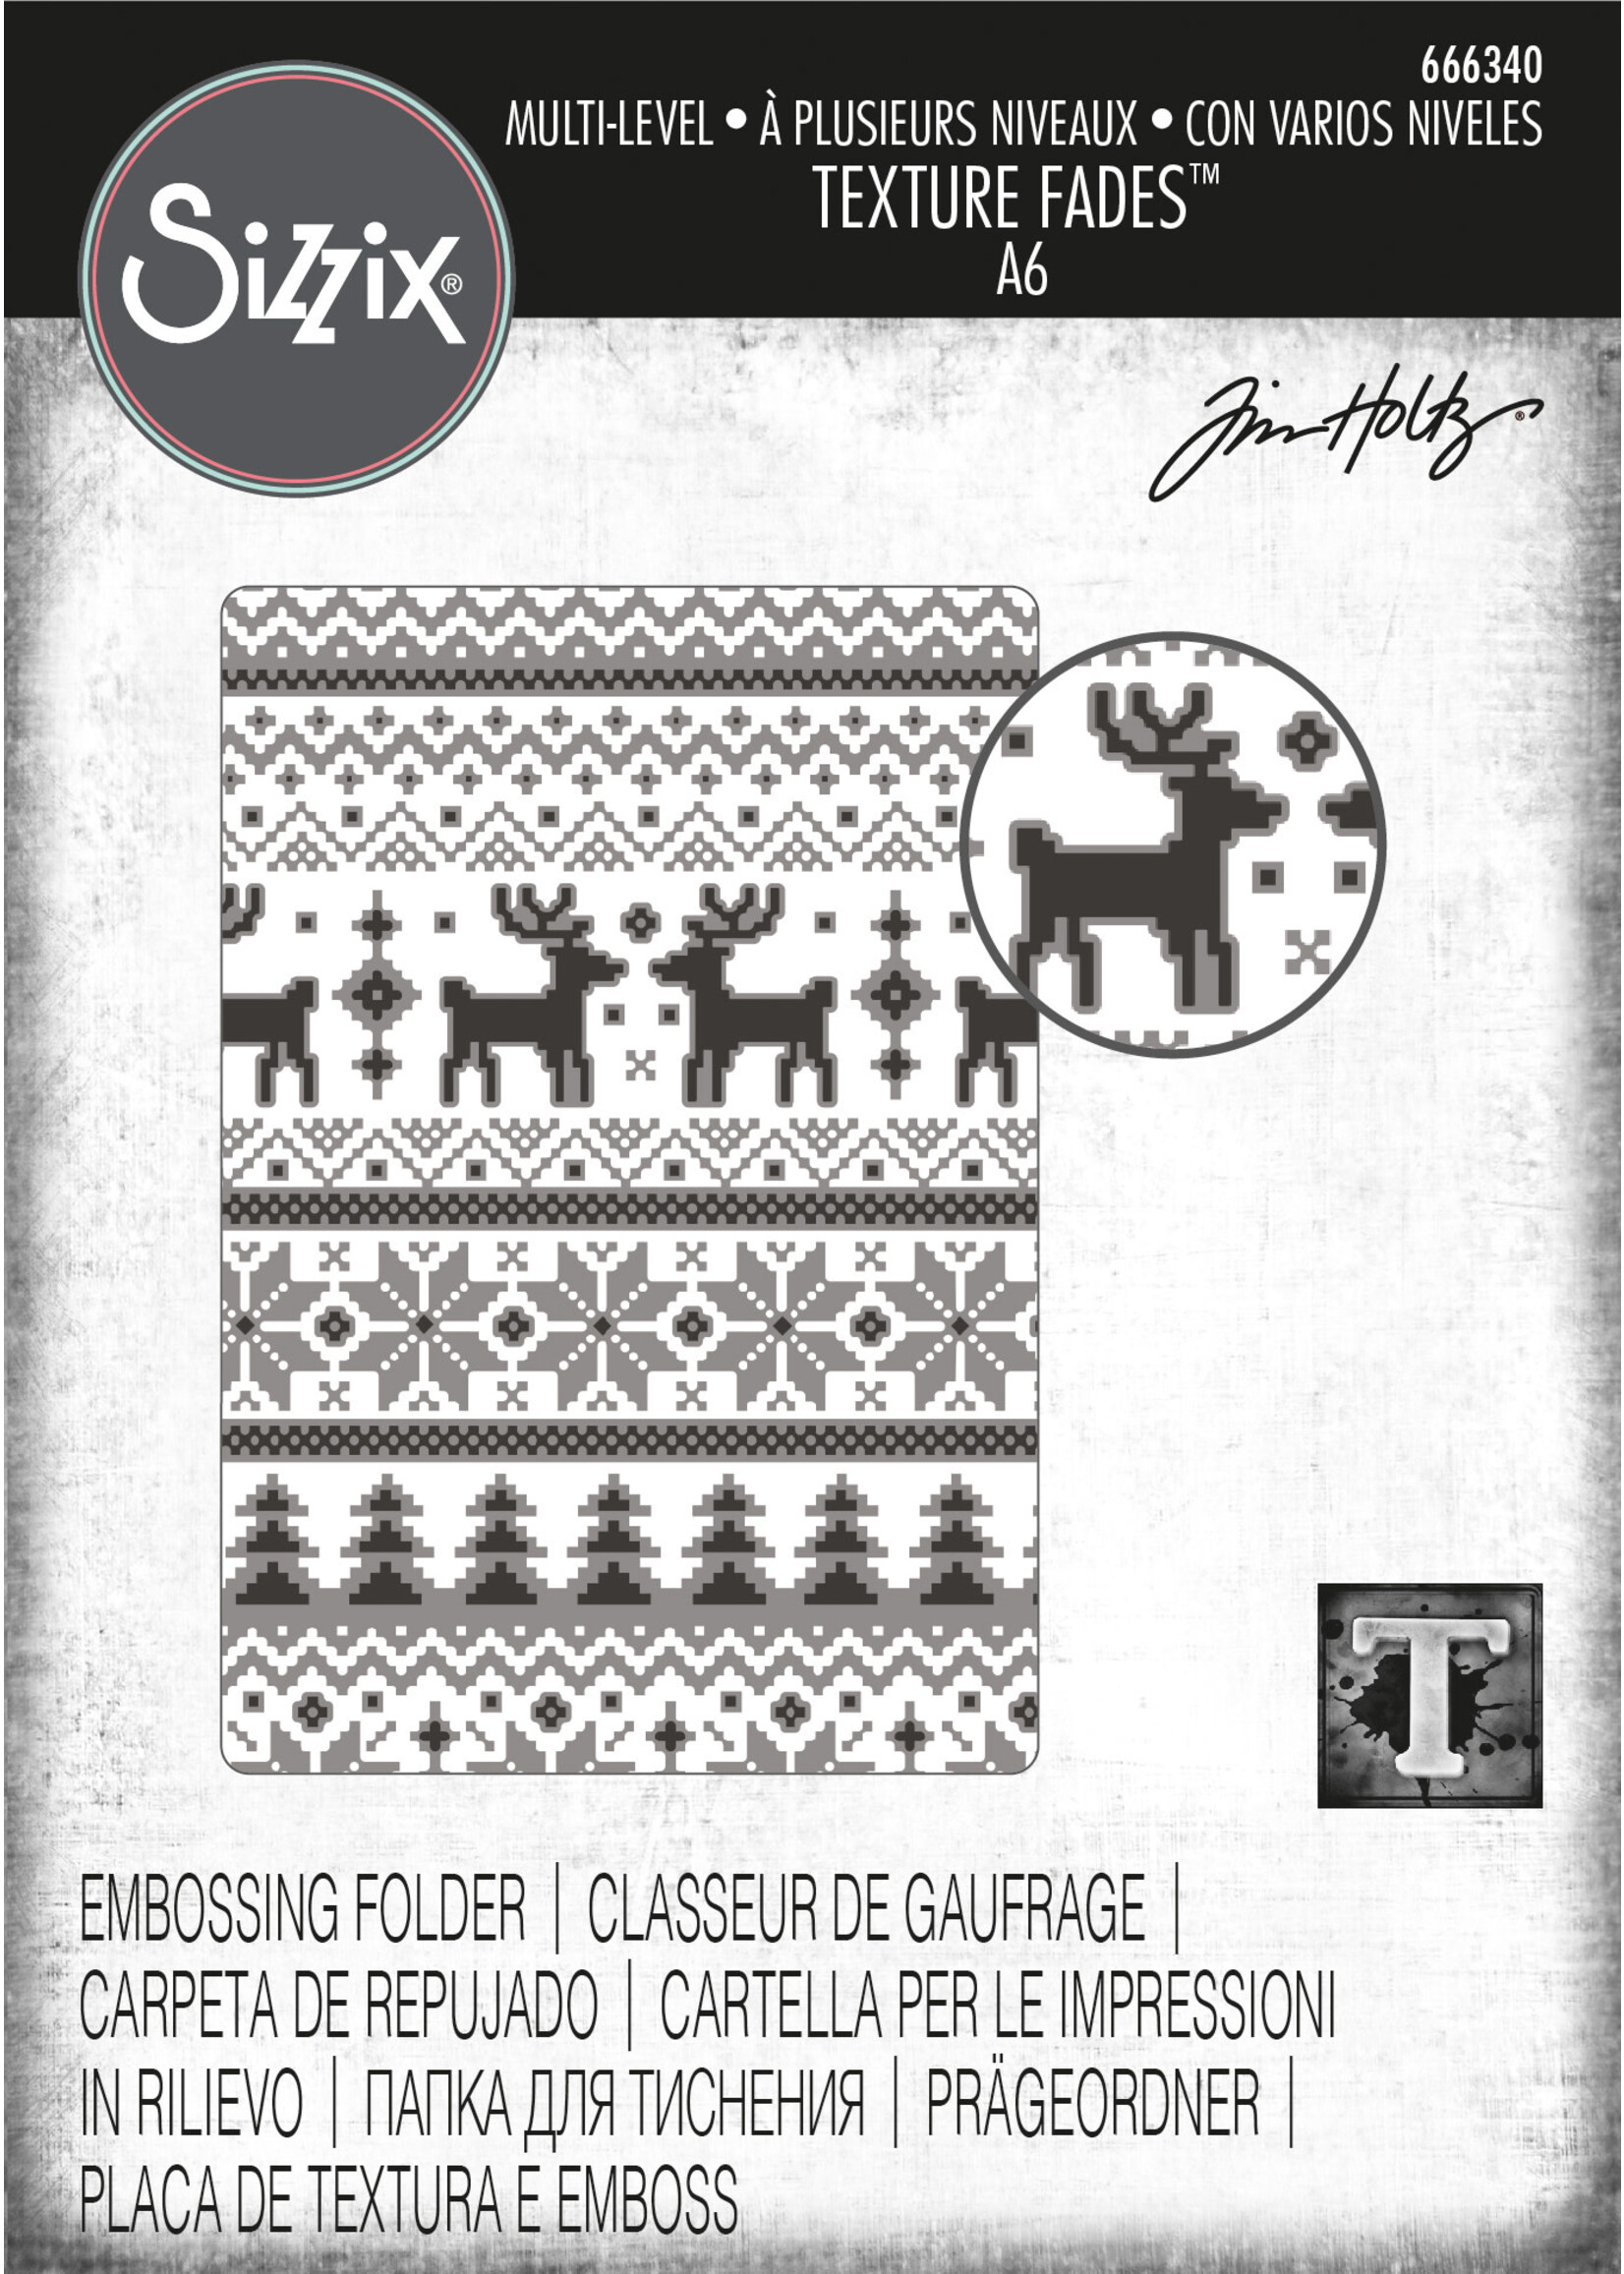 Tim Holtz Multi-Level Texture Fades Embossing Folder Holiday Knit by Tim Holtz